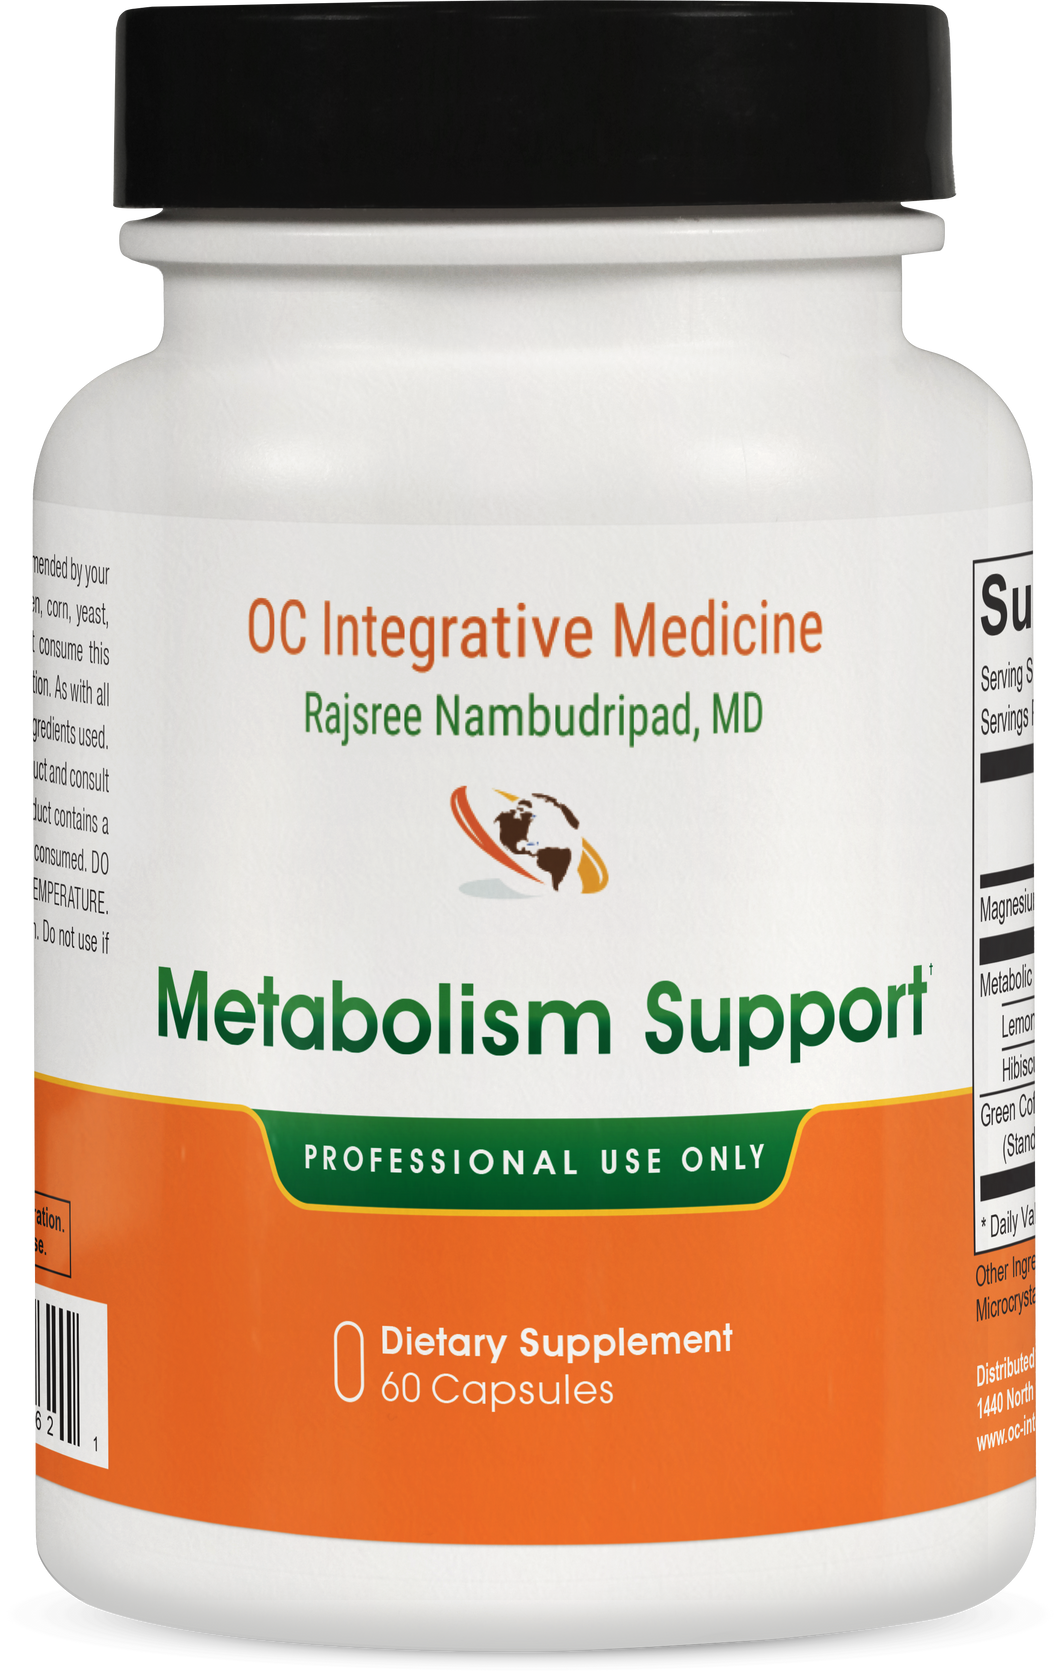 Metabolic support supplements